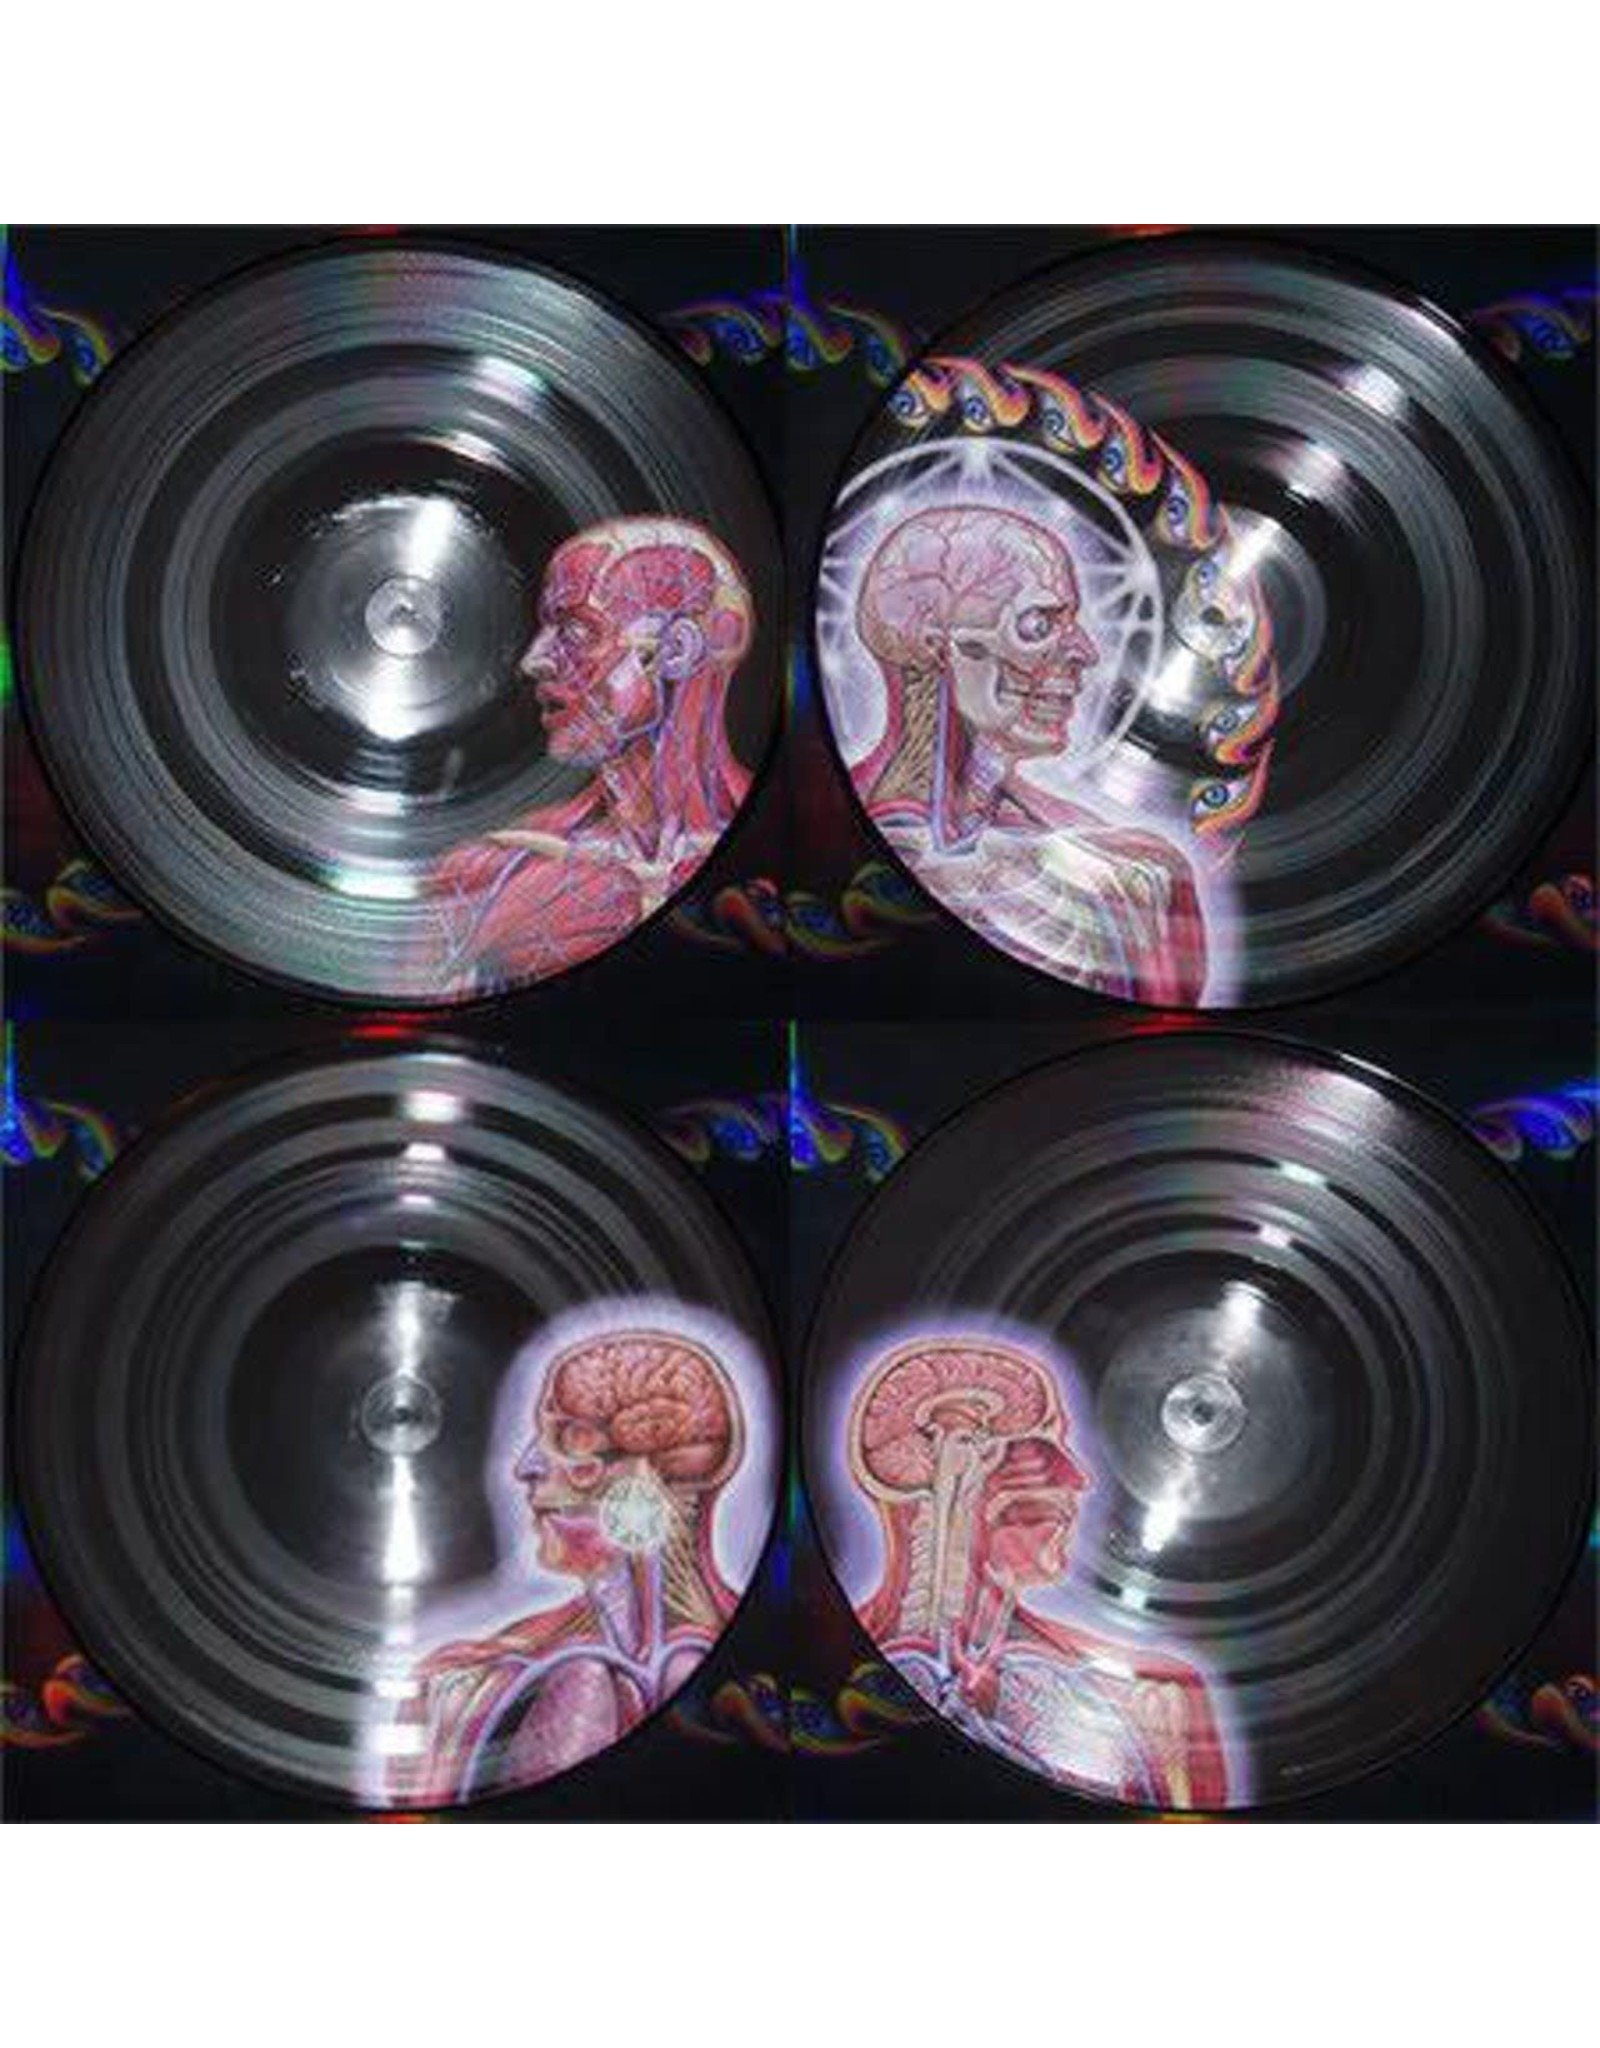 Tool - Lateralus (Limited Edition) (Vinyl) - Pop Music